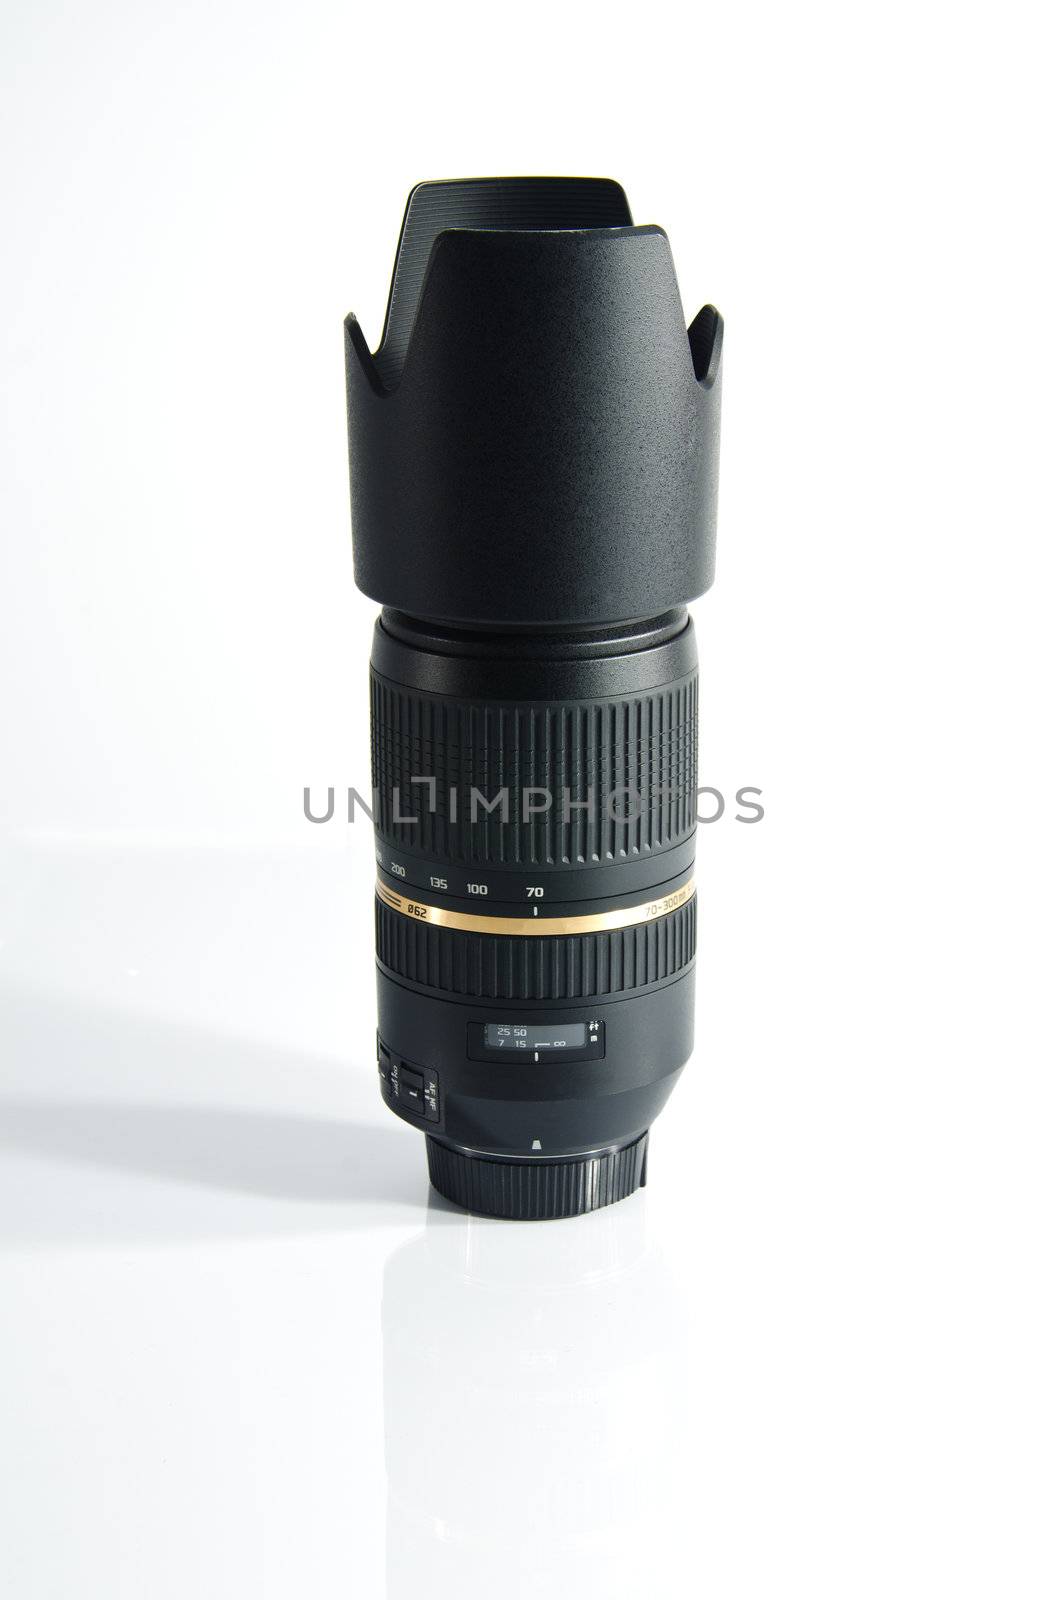 Telephoto lens by chatchai